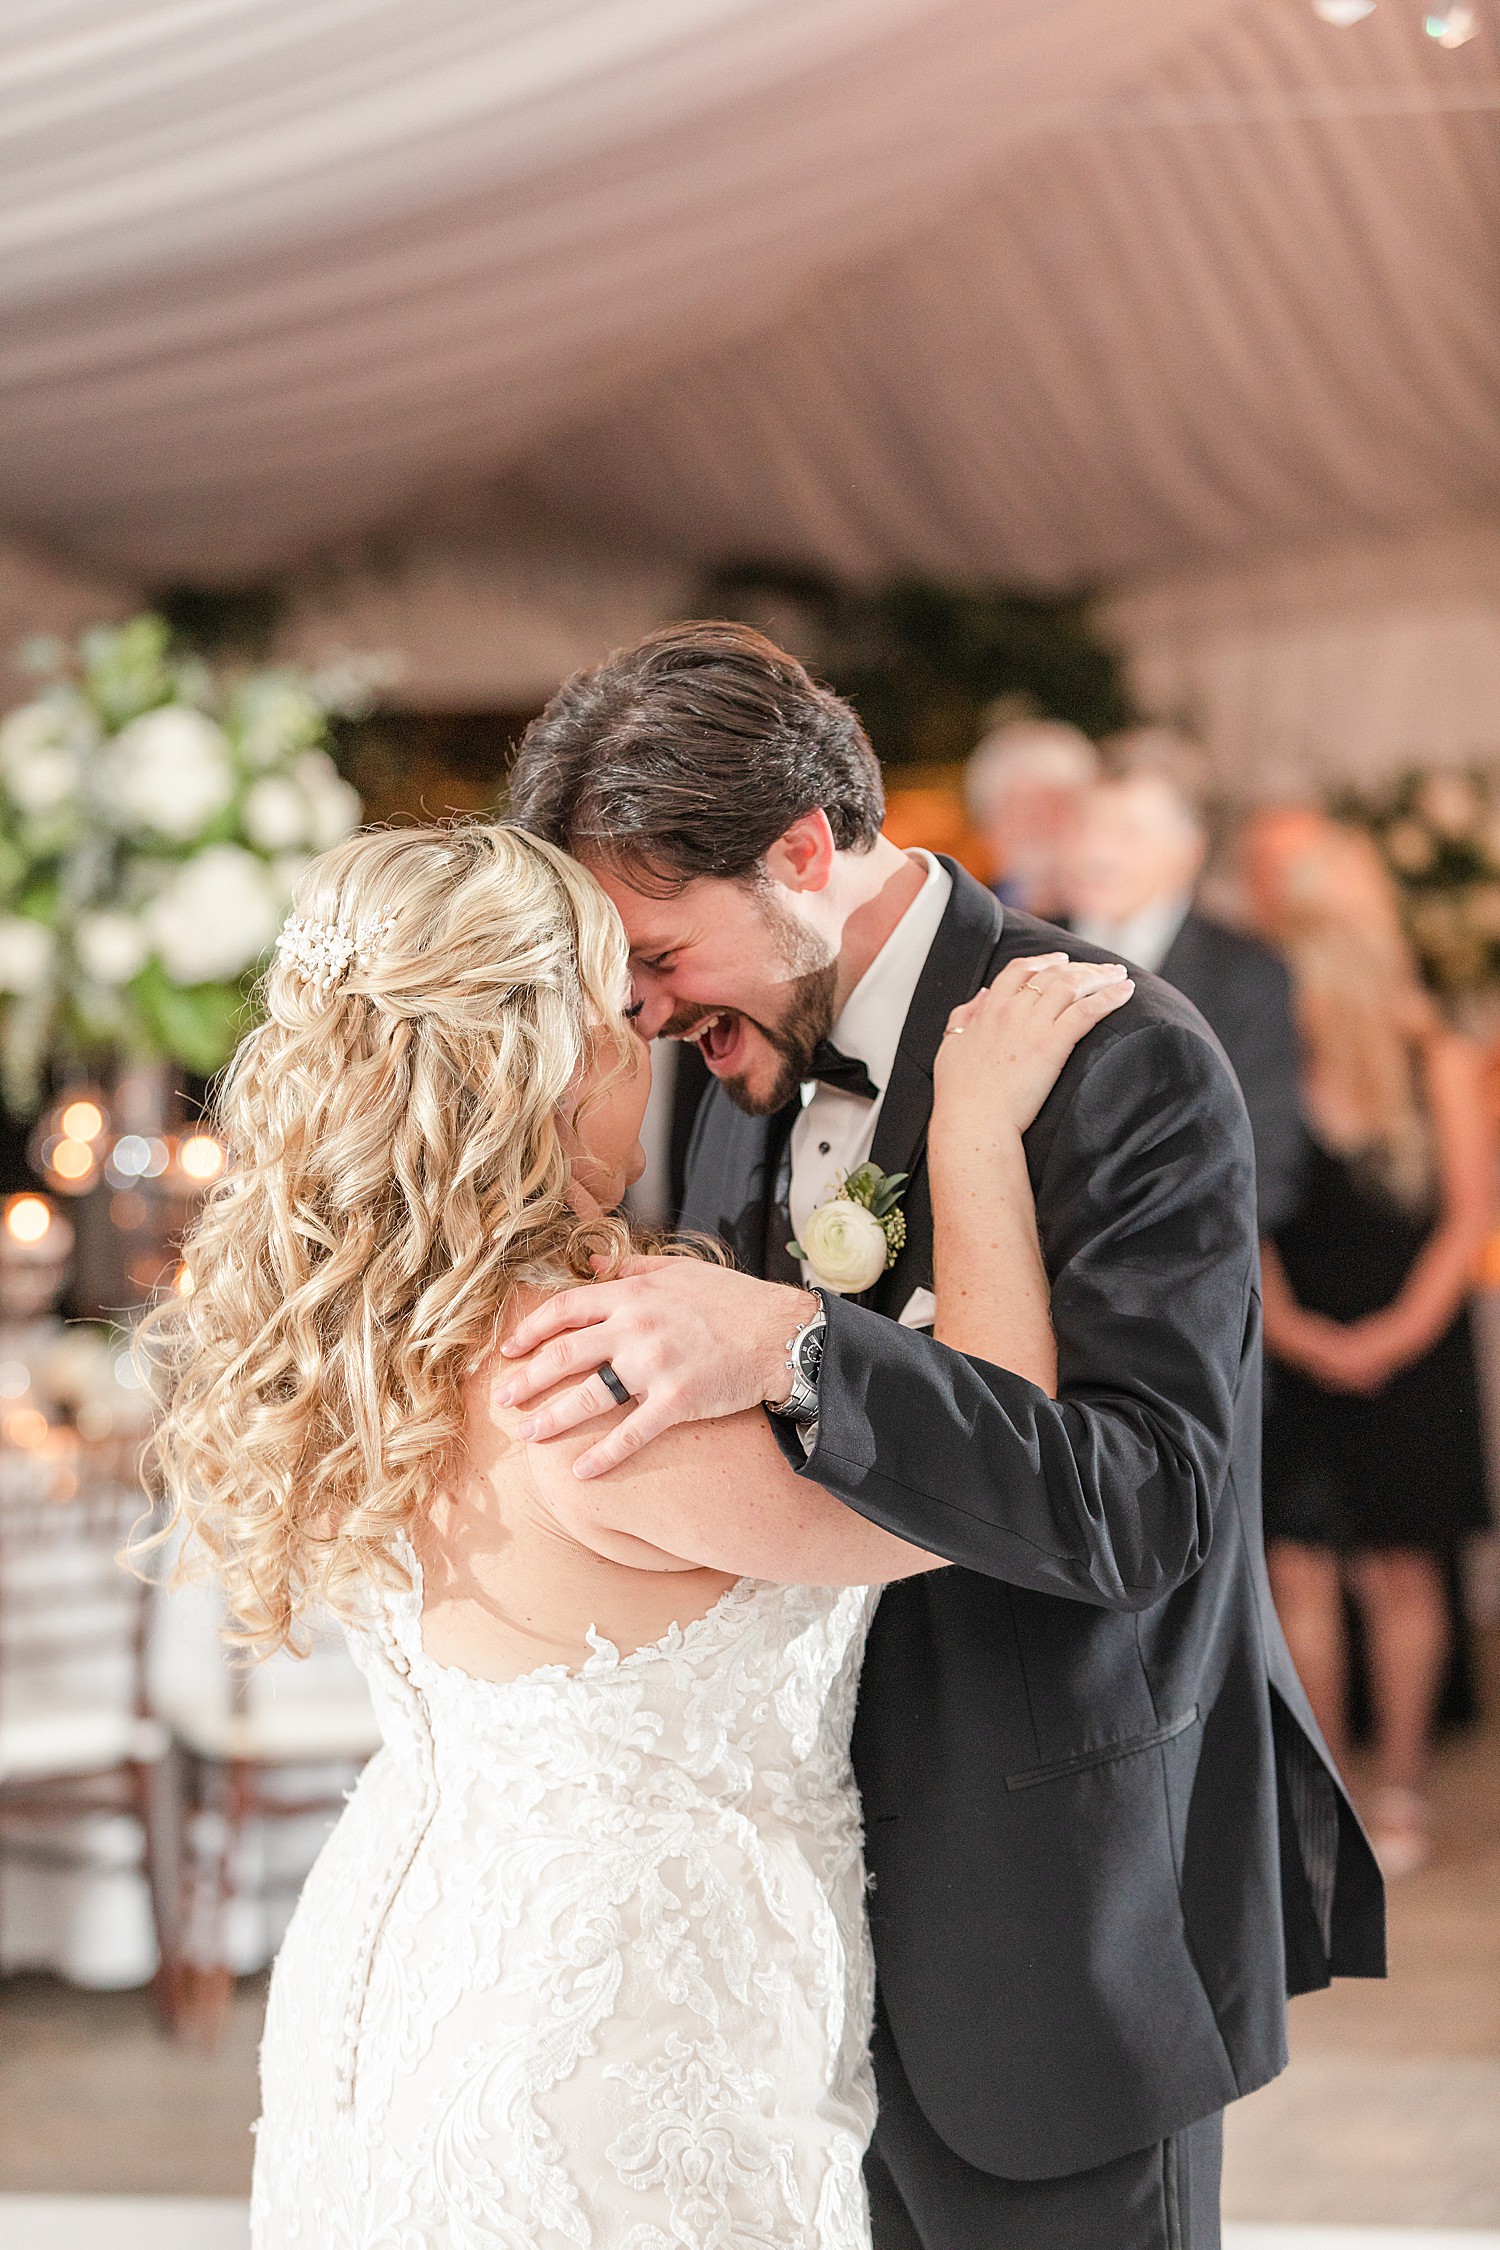 newlyweds first dance together at Windows on the Water at Frogbridge wedding reception reception 